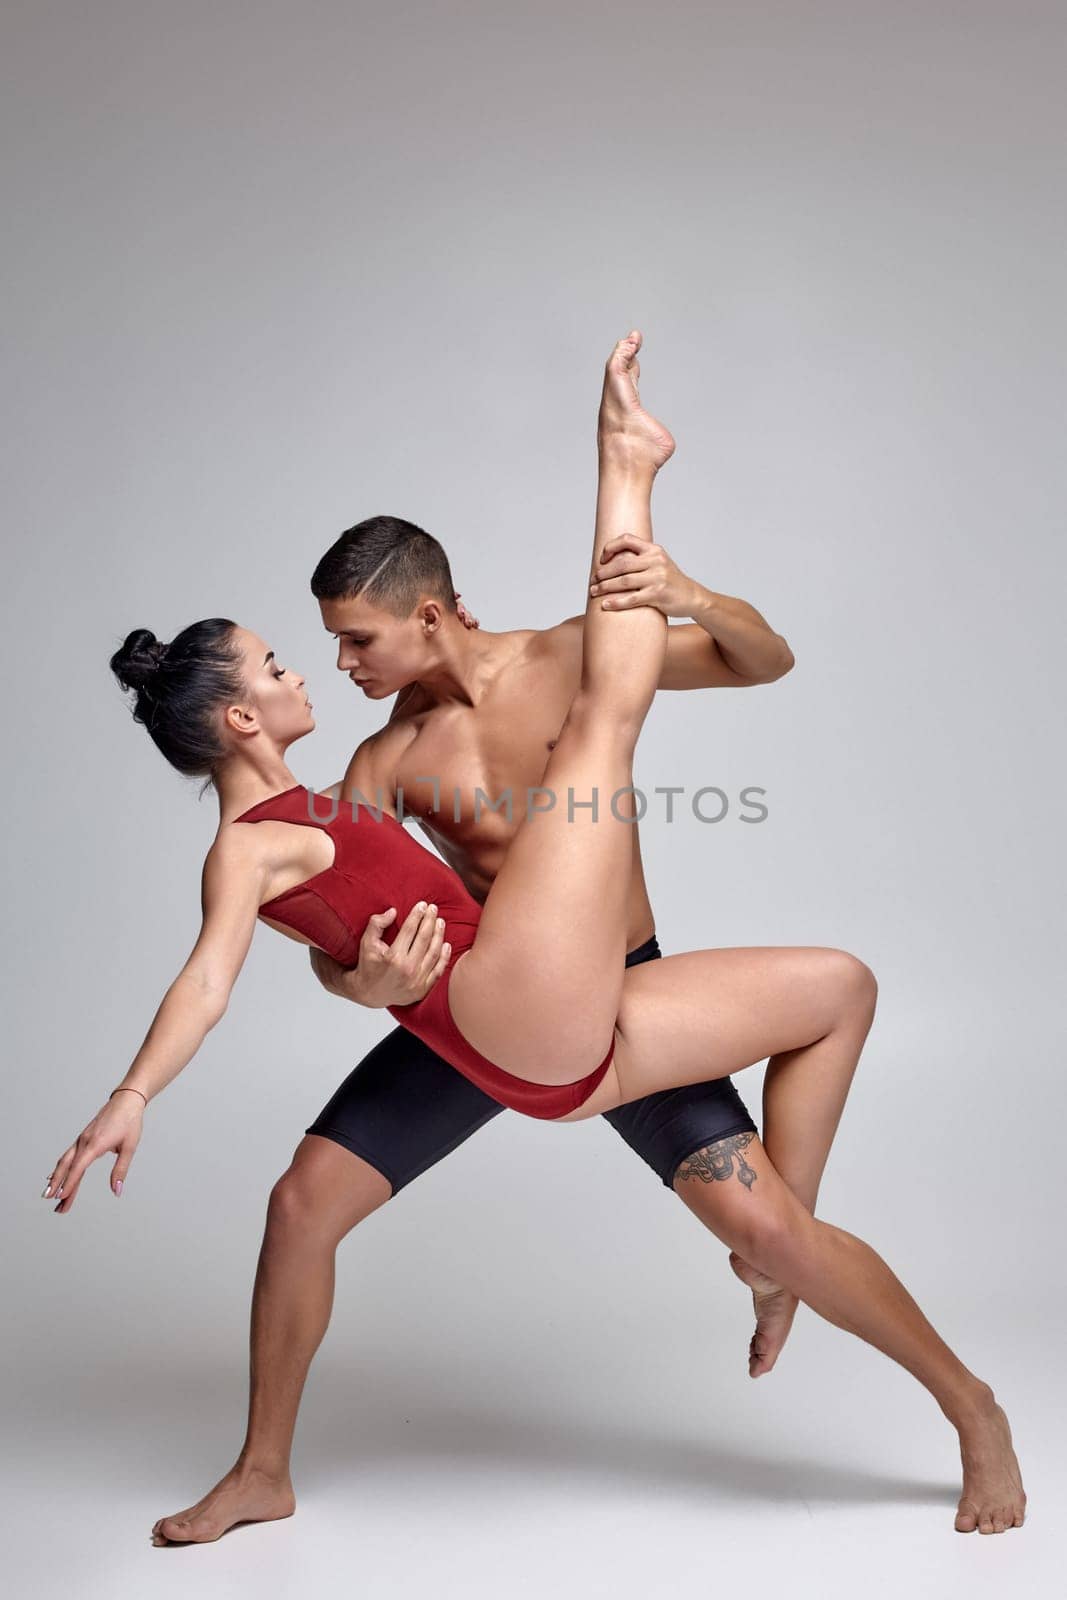 Pair of a talanted ballet dancers are posing against a gray studio background. Handsome man in black shorts and charming woman in a red swimwear are dancing together. Ballet and contemporary choreography concept. Art photo.